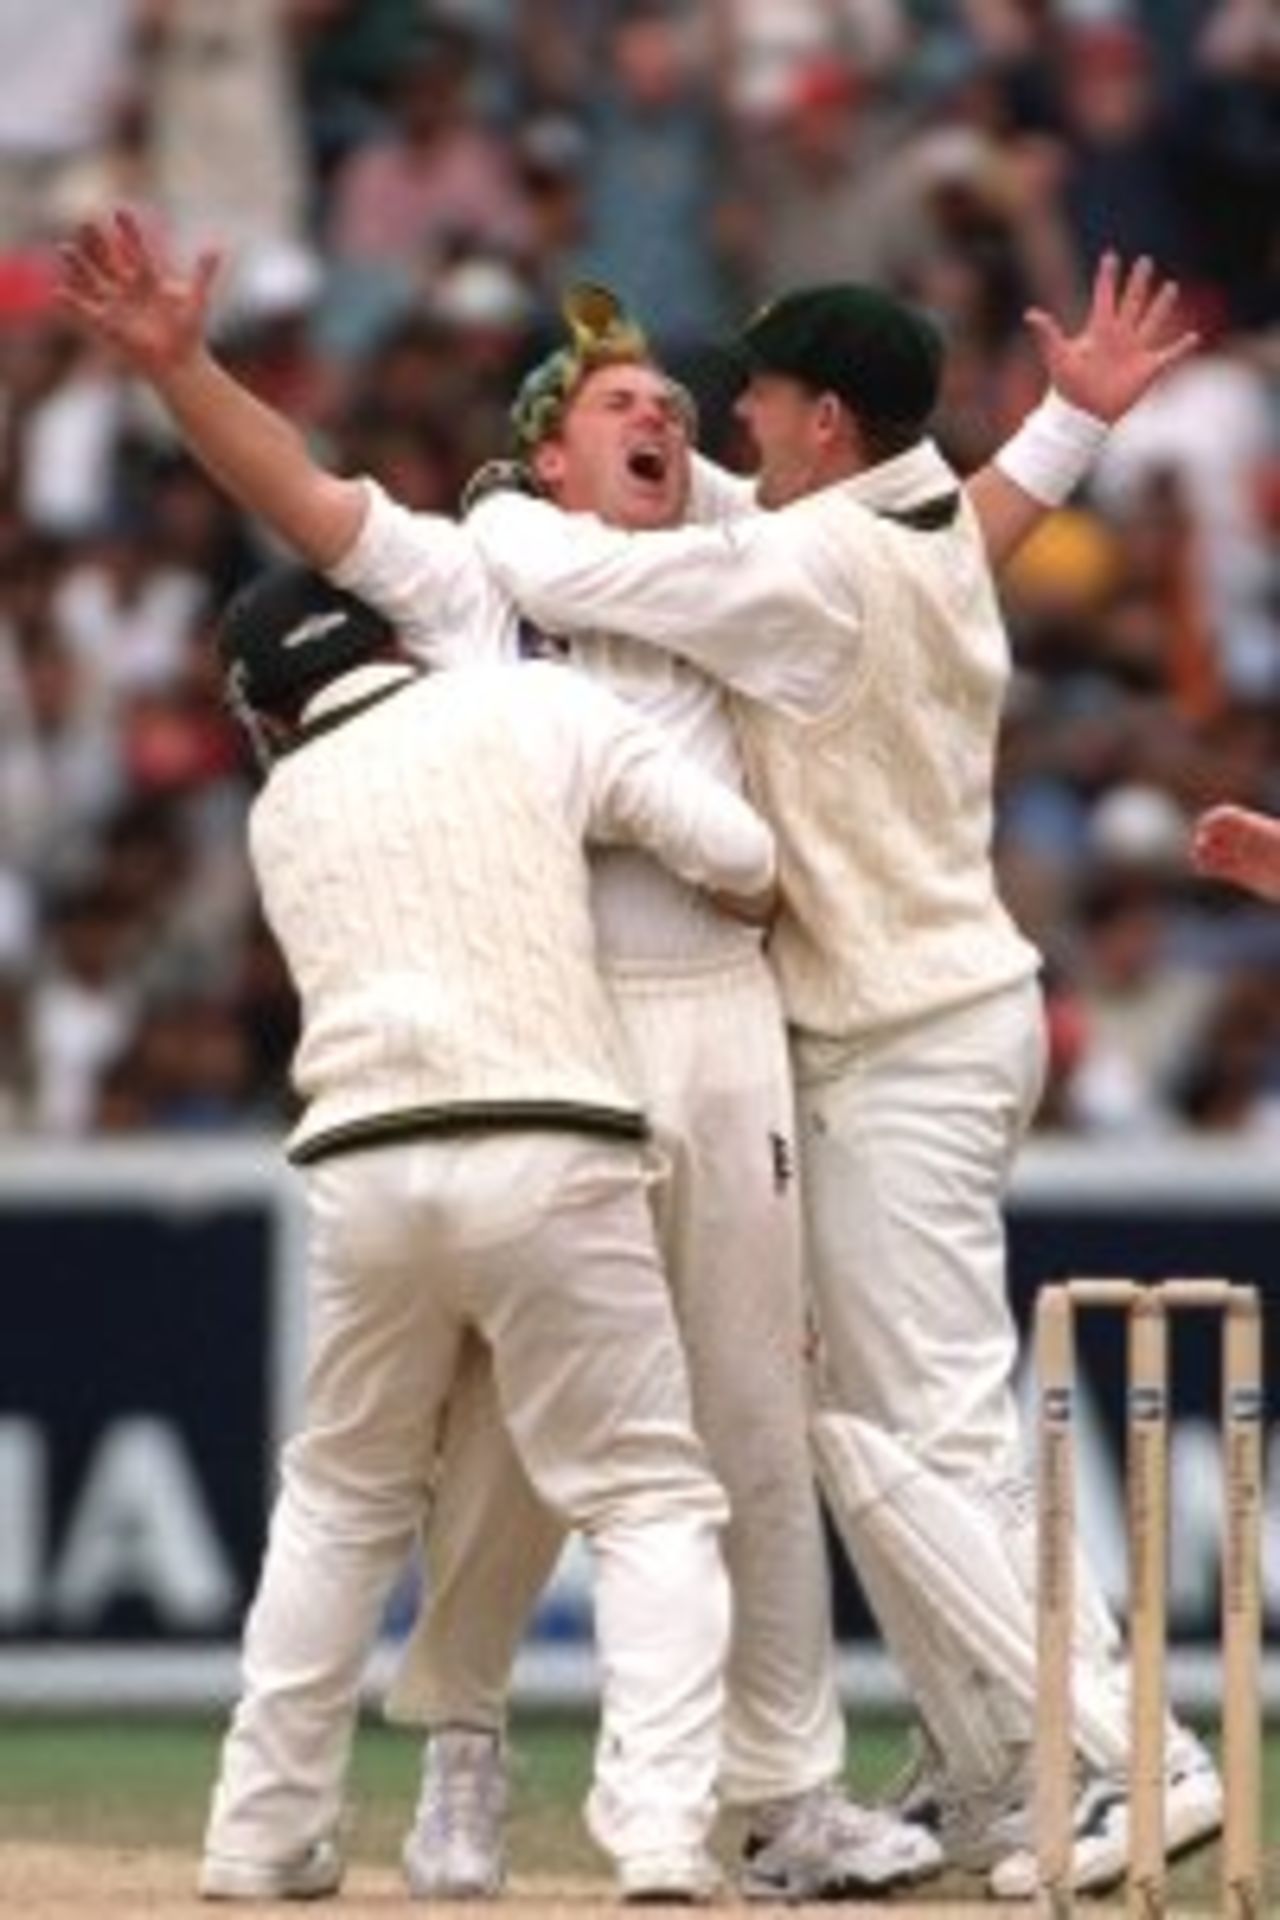 30 Dec 1999: Shane Warne of Australia is embraced by team mates Adam Gilchrist and Justin Langer as he celebrates the wicket of Sachin Tendulkar of India, on day five of the second test match between Australia and India at the Melbourne Cricket Ground, Melbourne, Australia. Tendulkar was judged LBW to Warne for 52 runs. Australia later won the match by 180 runs.